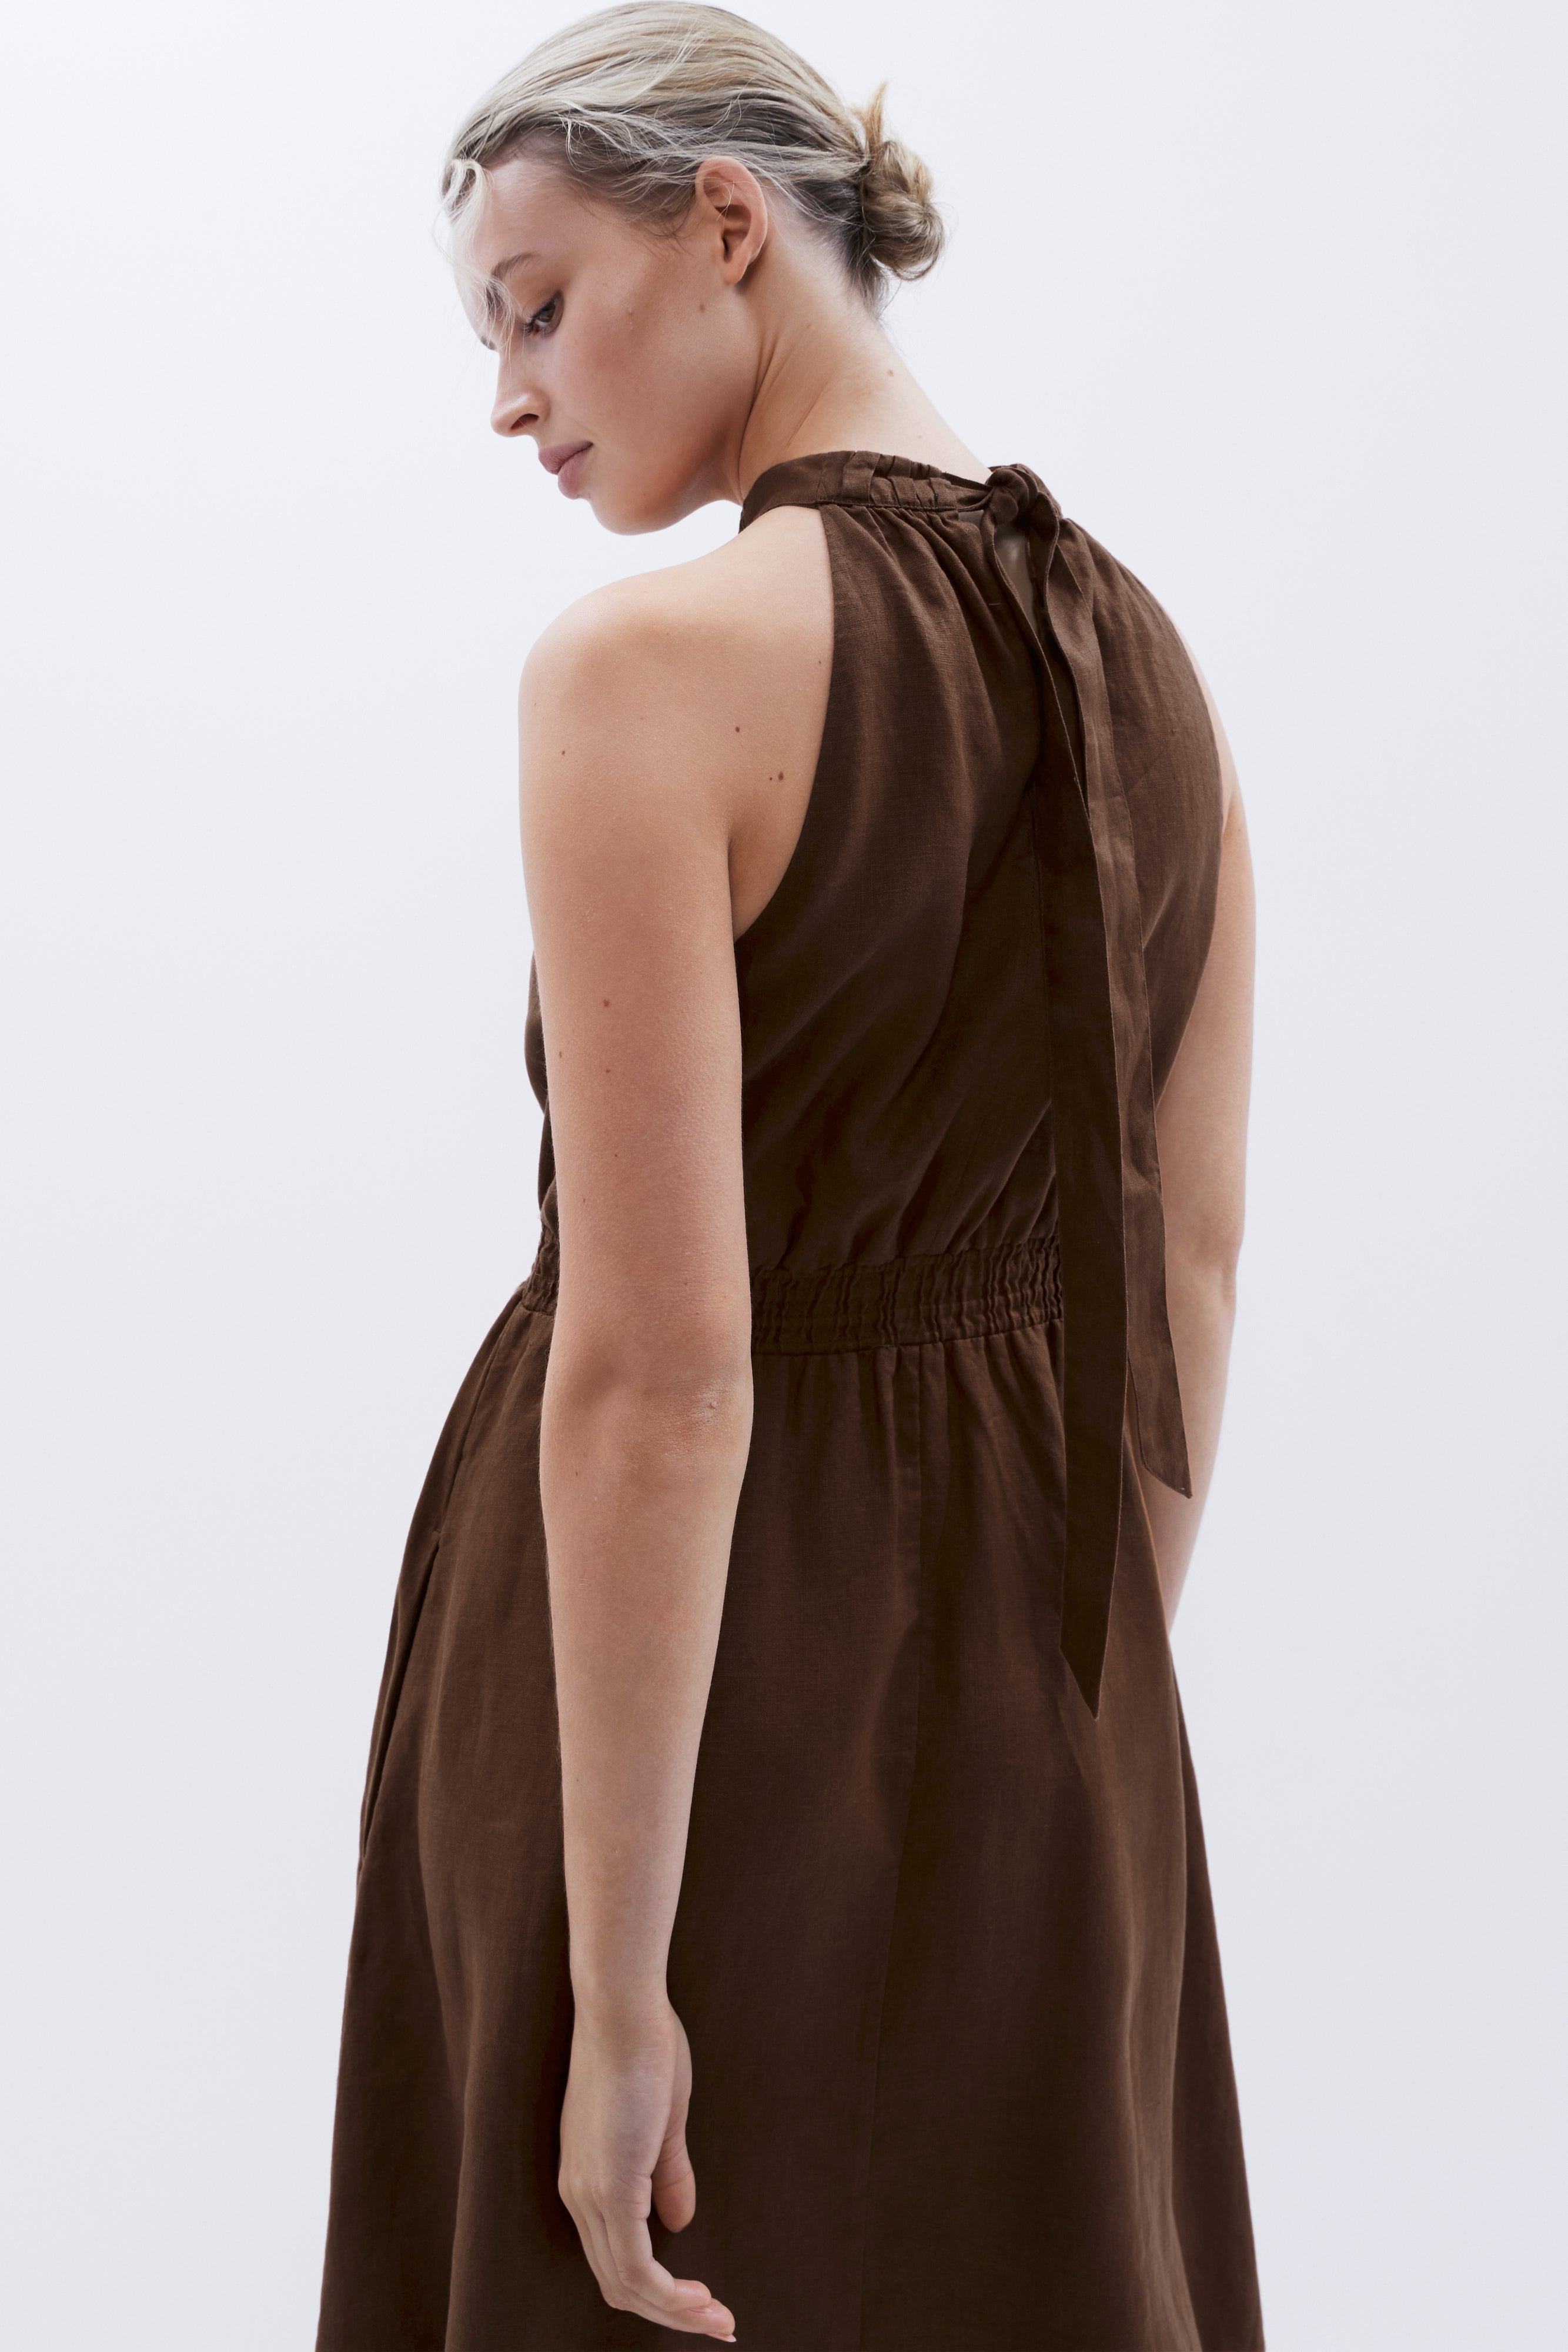 Cutout Sleeveless Dress by Obando Collective for $40